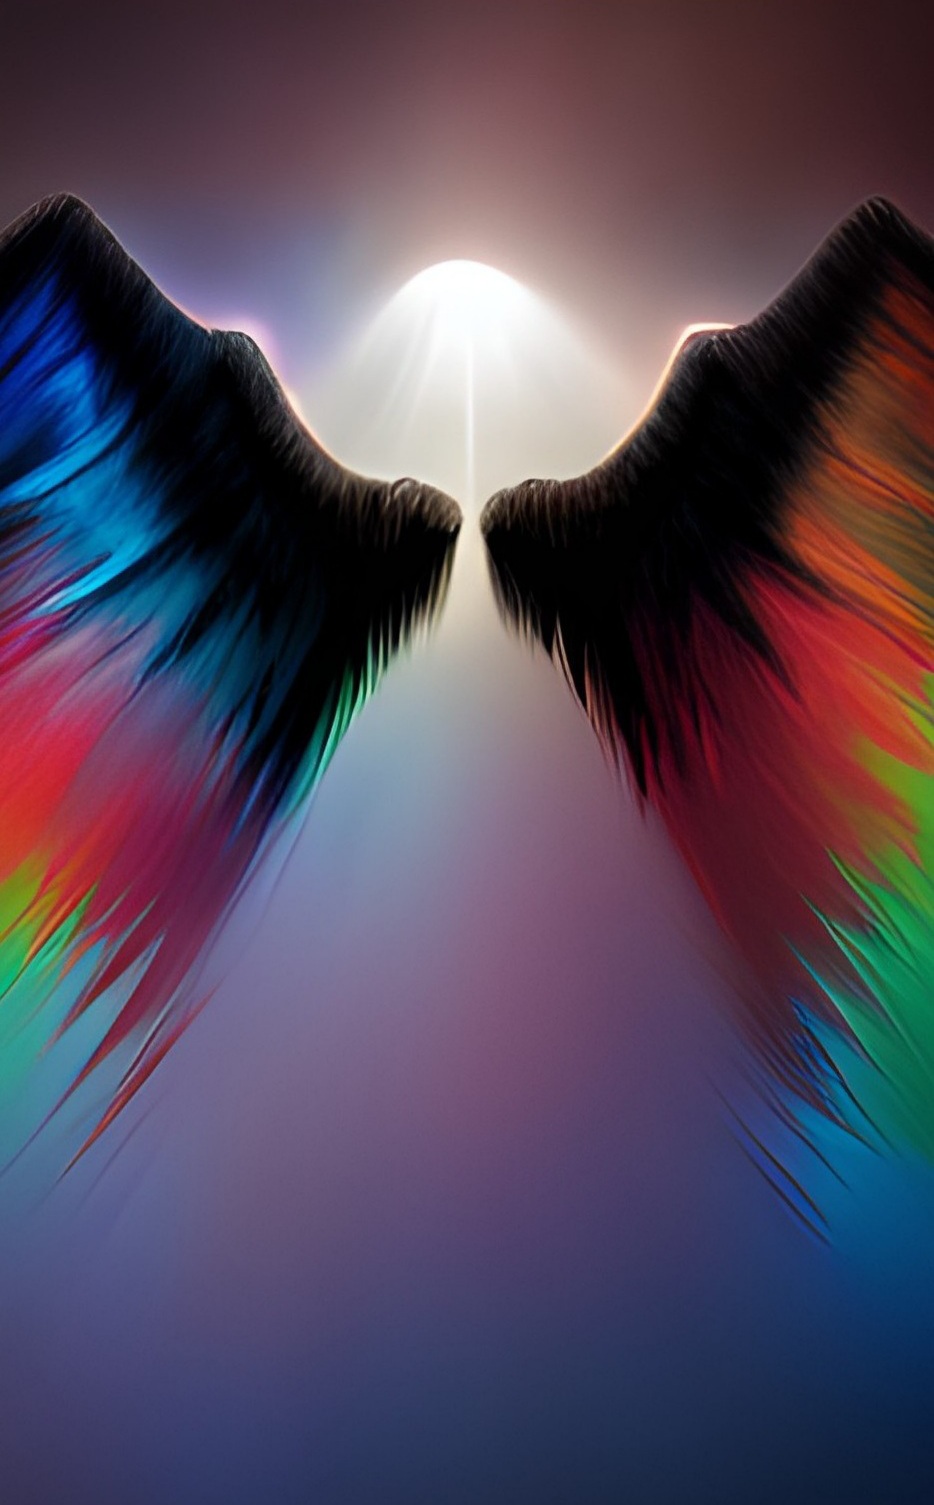 Colors of Wings I